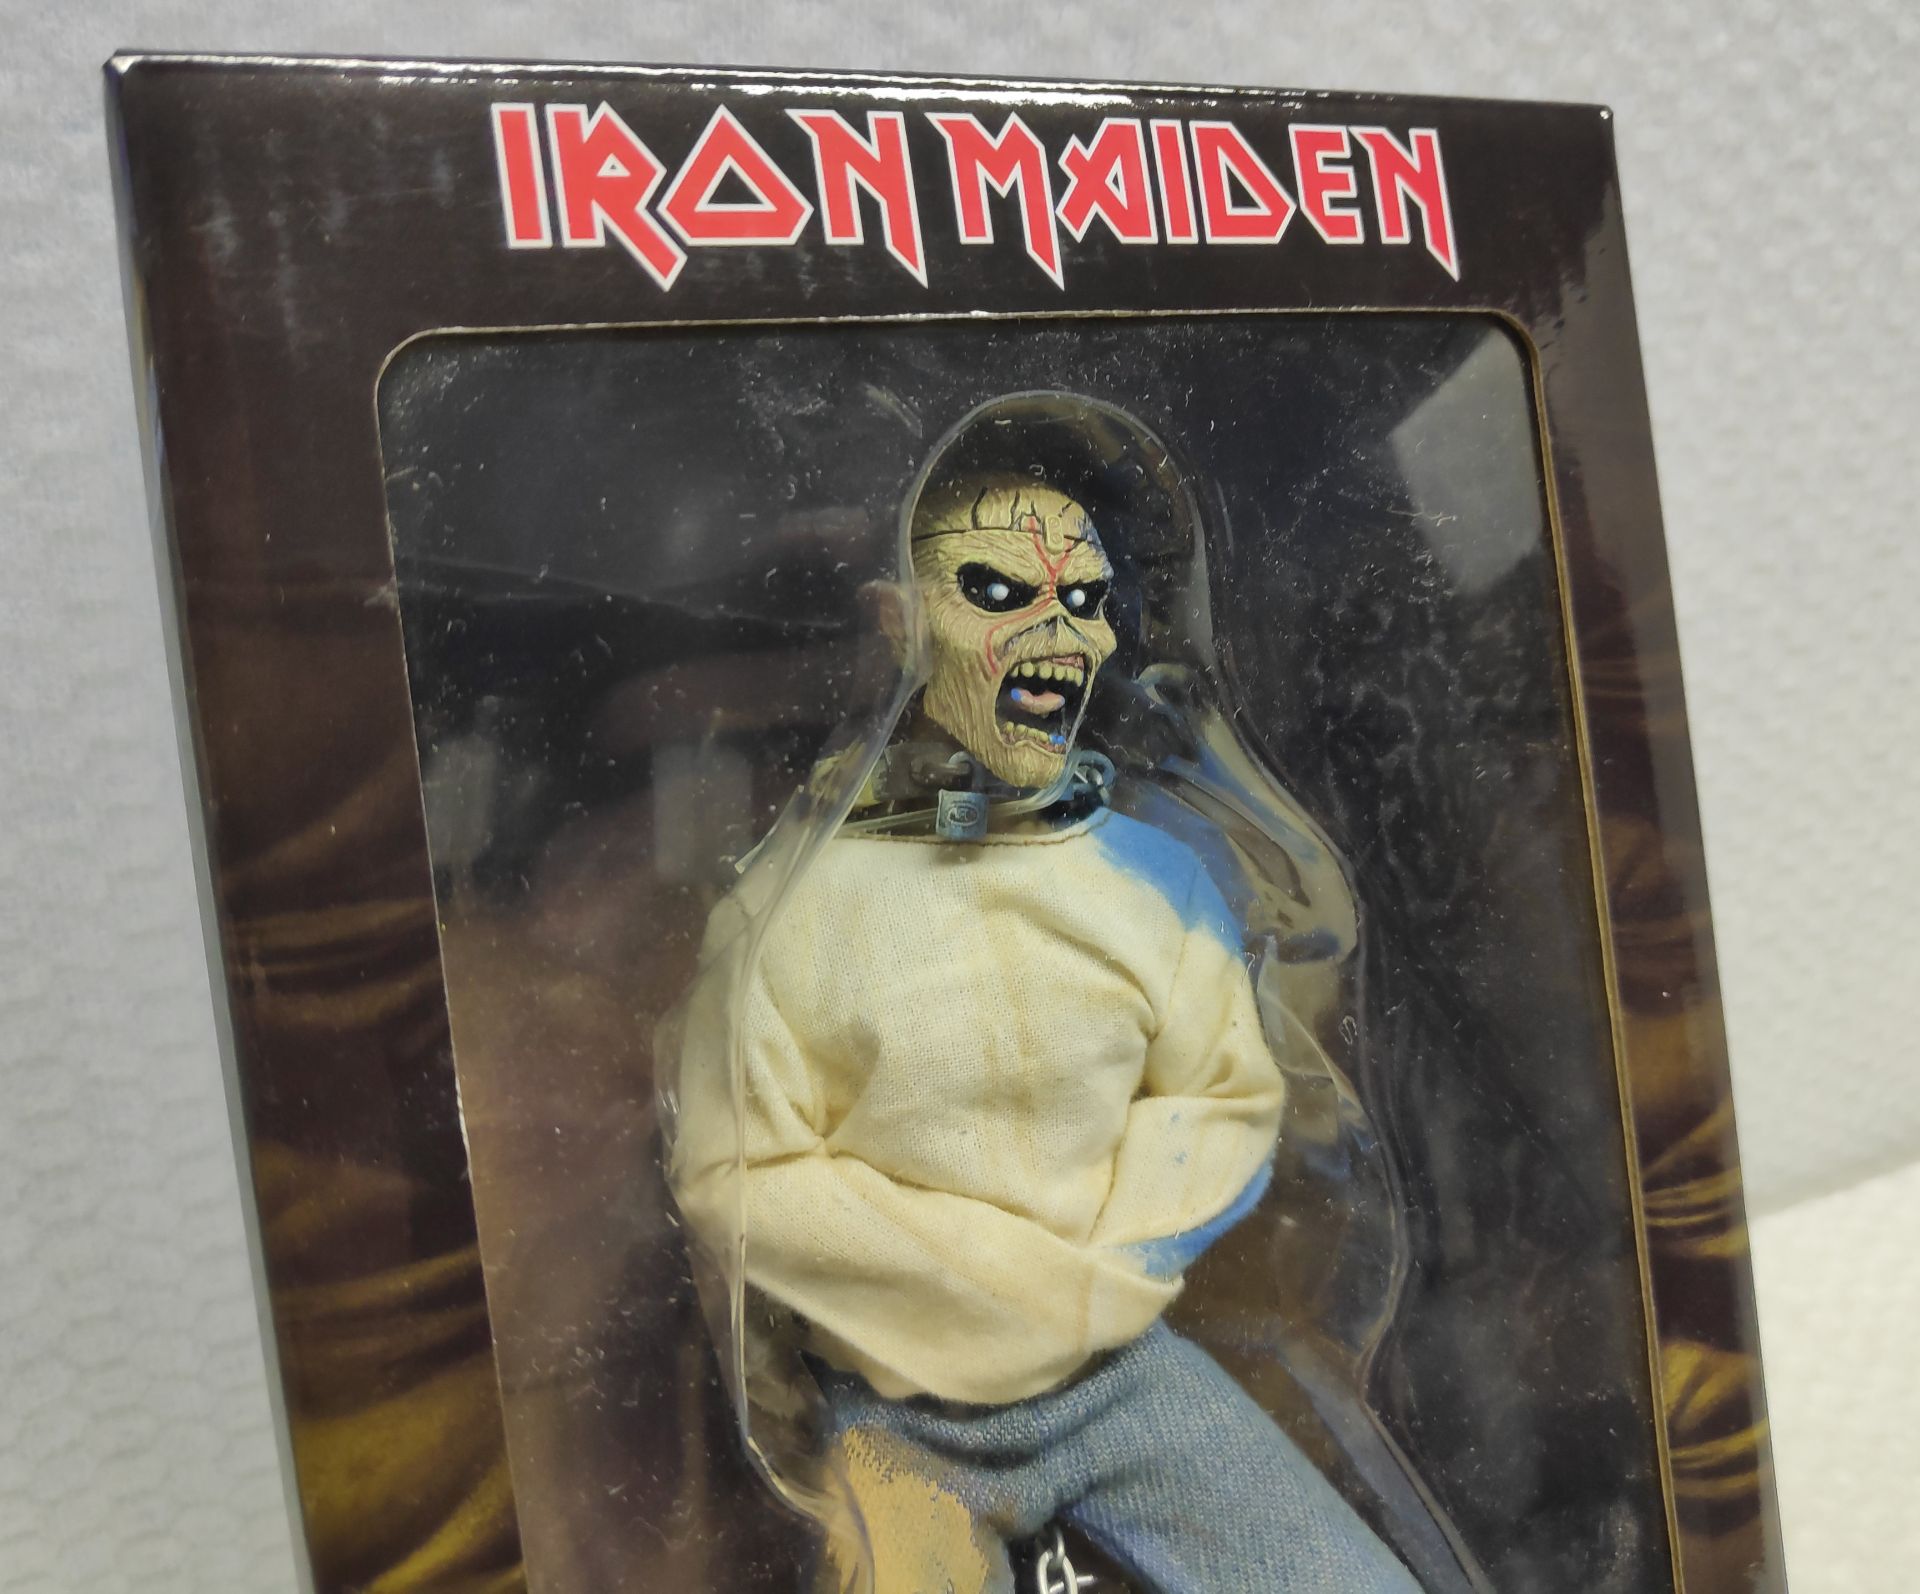 1 x Iron Maiden Eddie Piece of Mind NECA Action Figure - New/Boxed - HTYS166 - CL720 - Location: Alt - Image 4 of 11